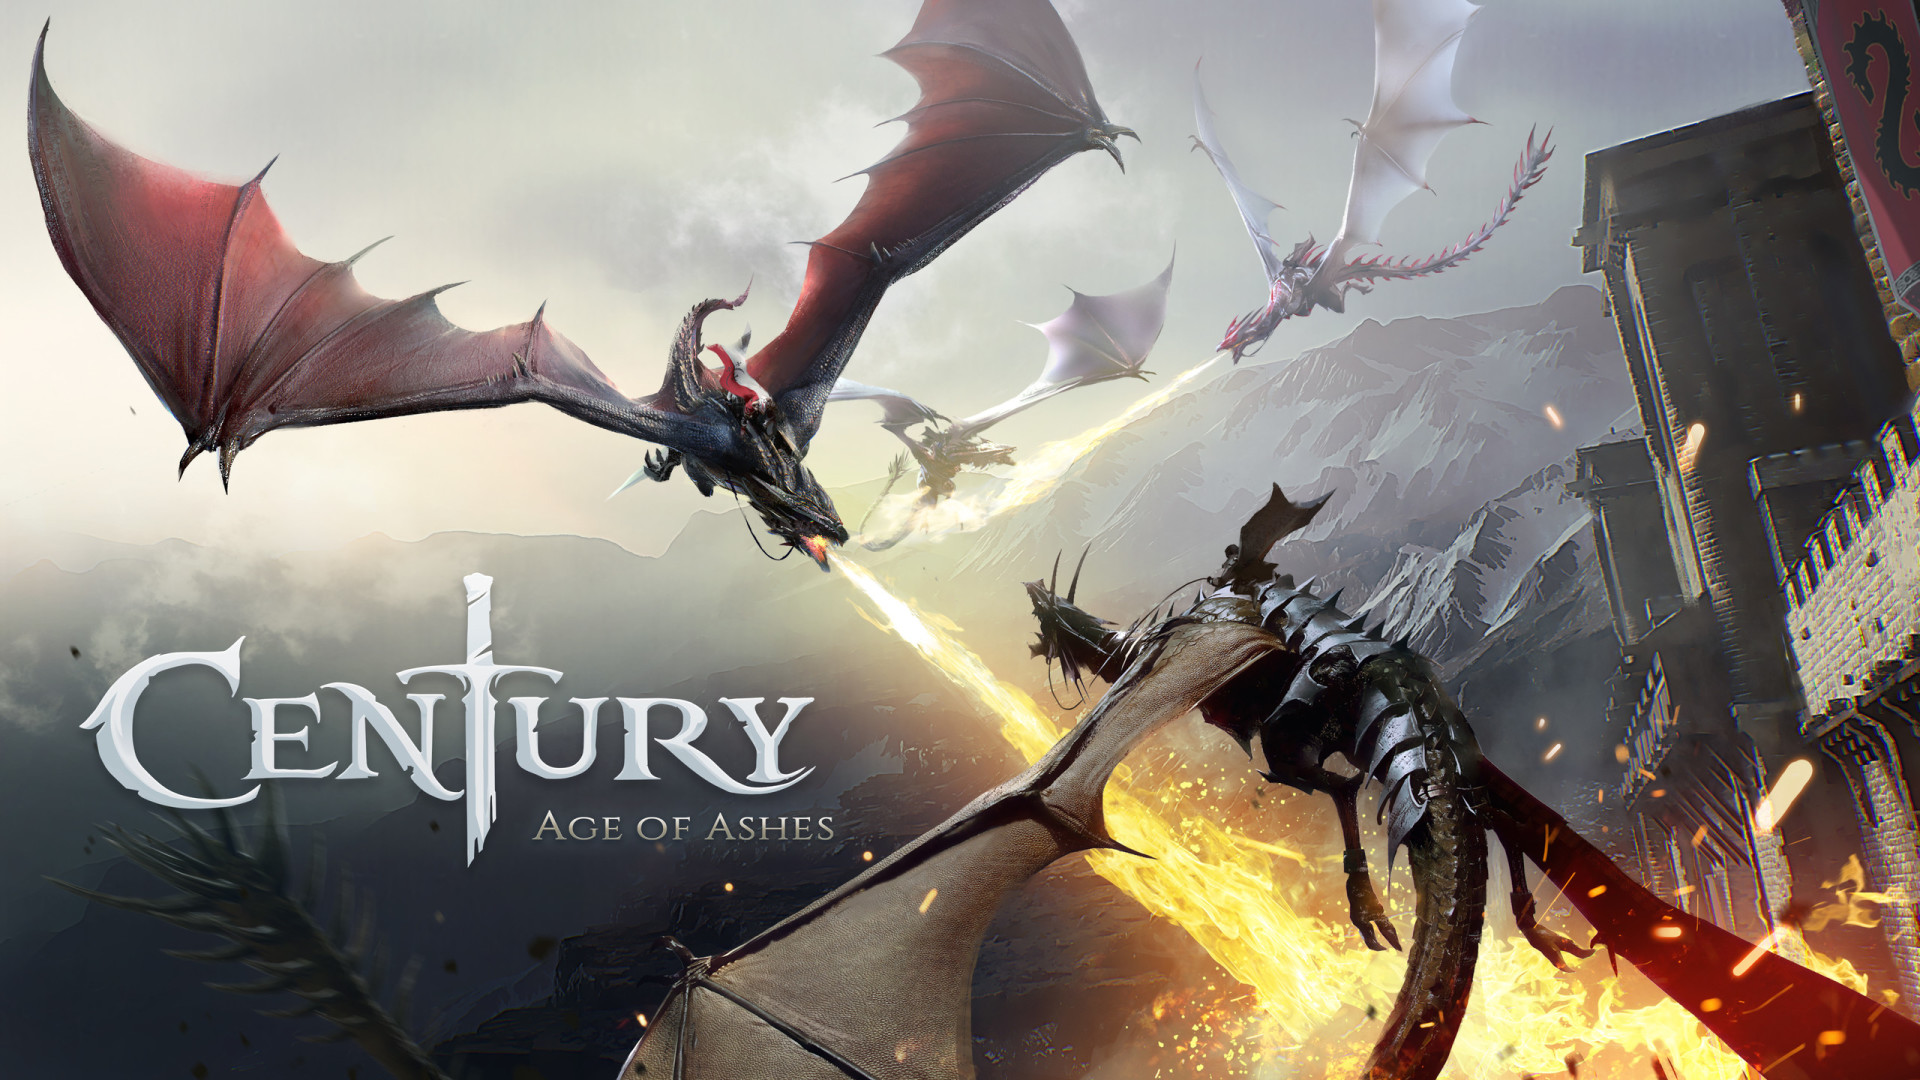 century: age of ashes game